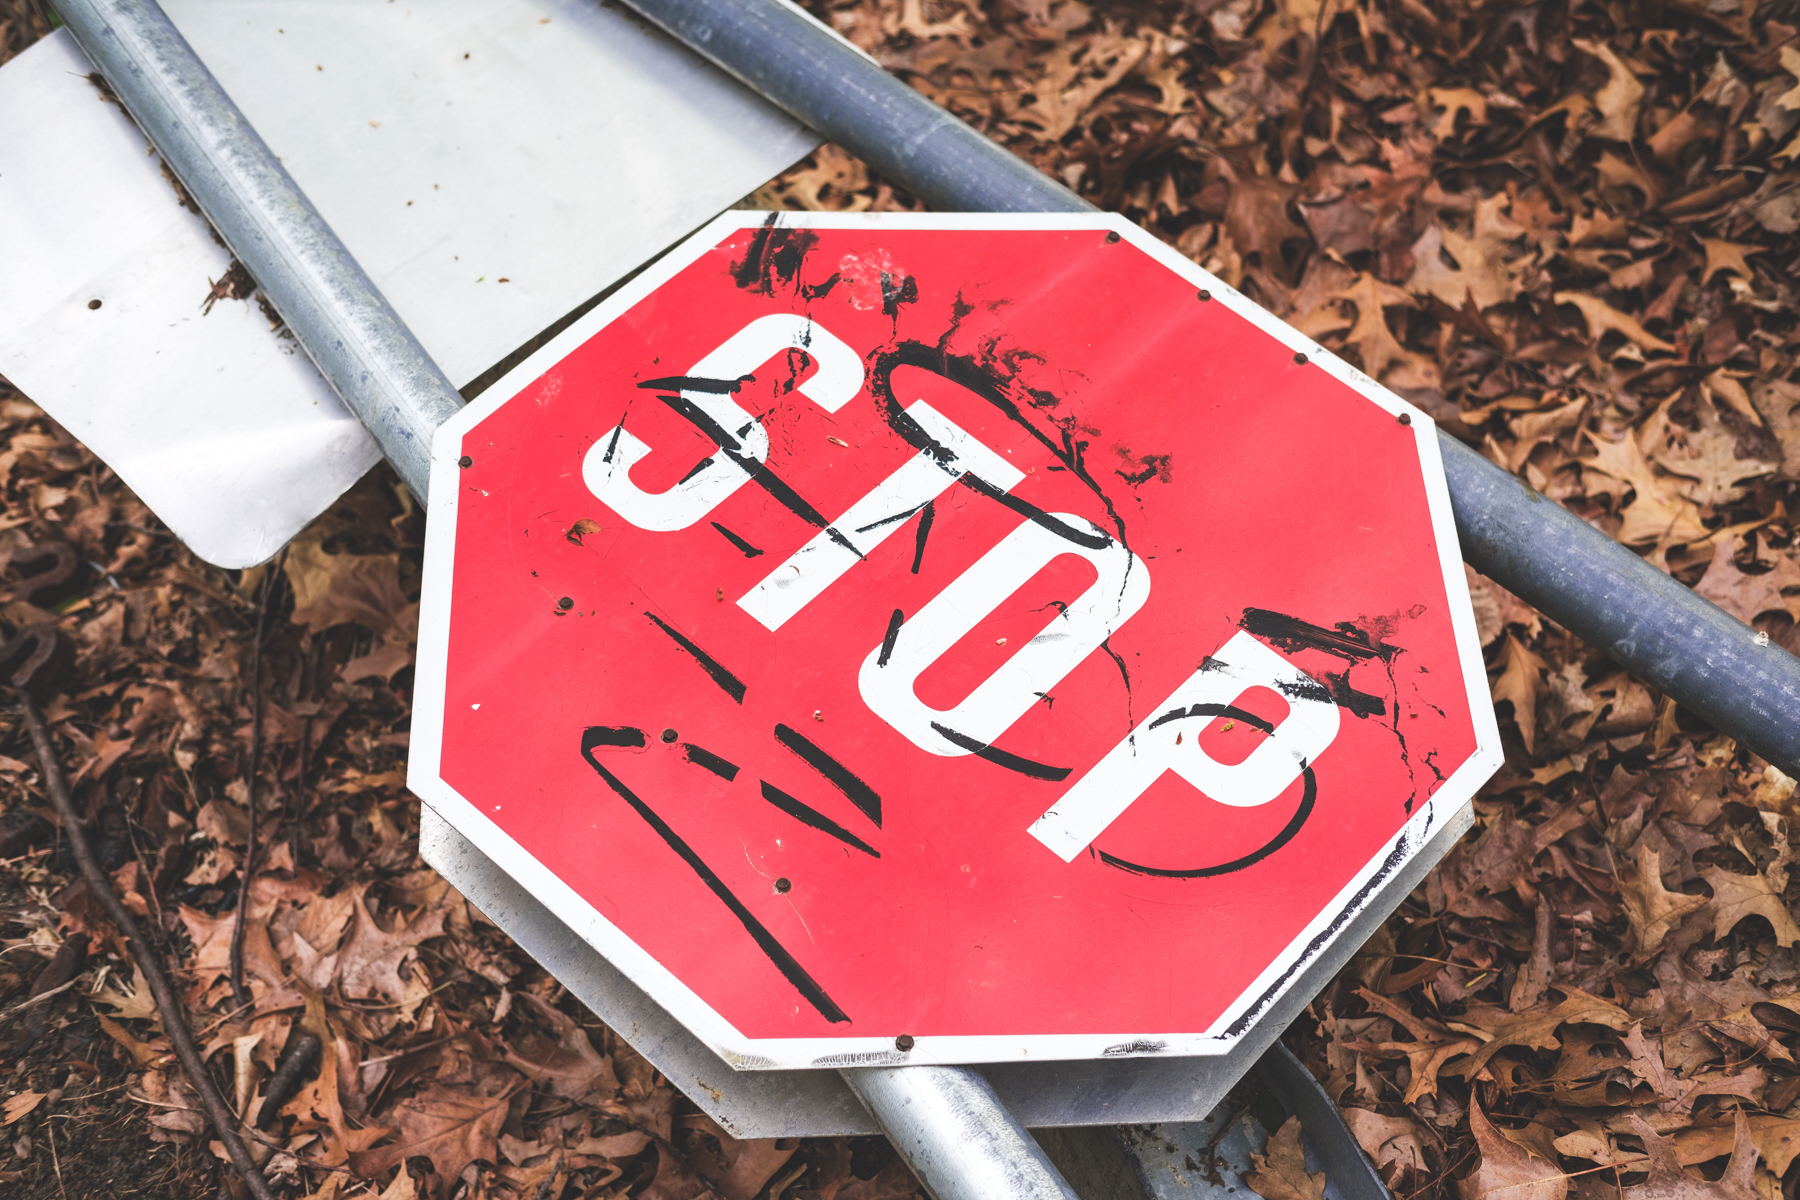 A stop sign with black markings lying on the ground with brown leaves around it.